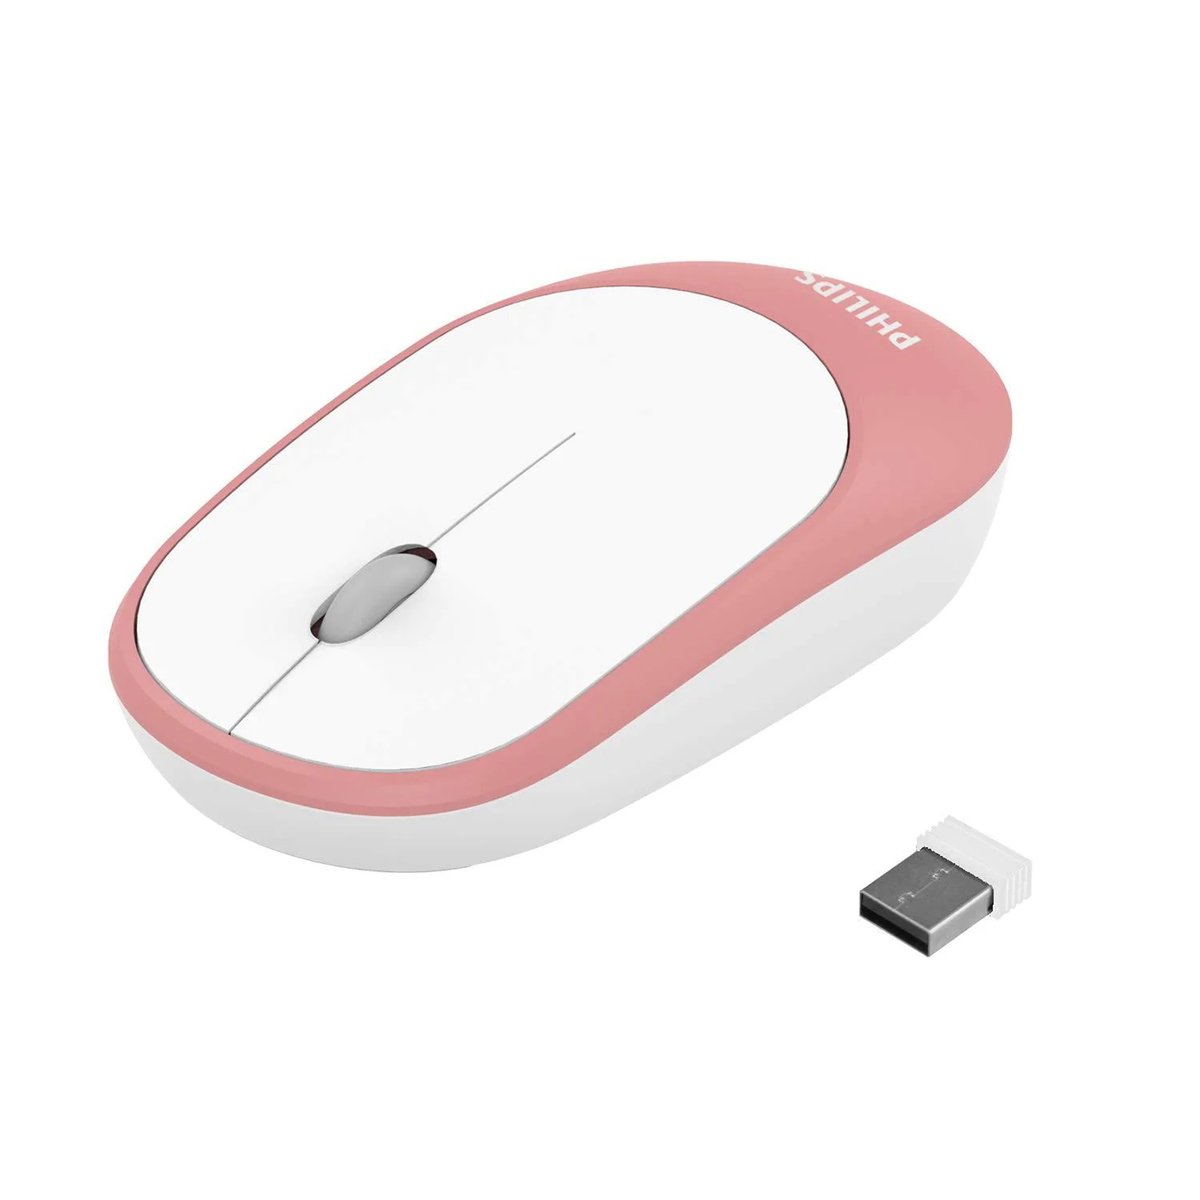 Philips Wireless Mouse SPK7314CYPI,Assorted Colors